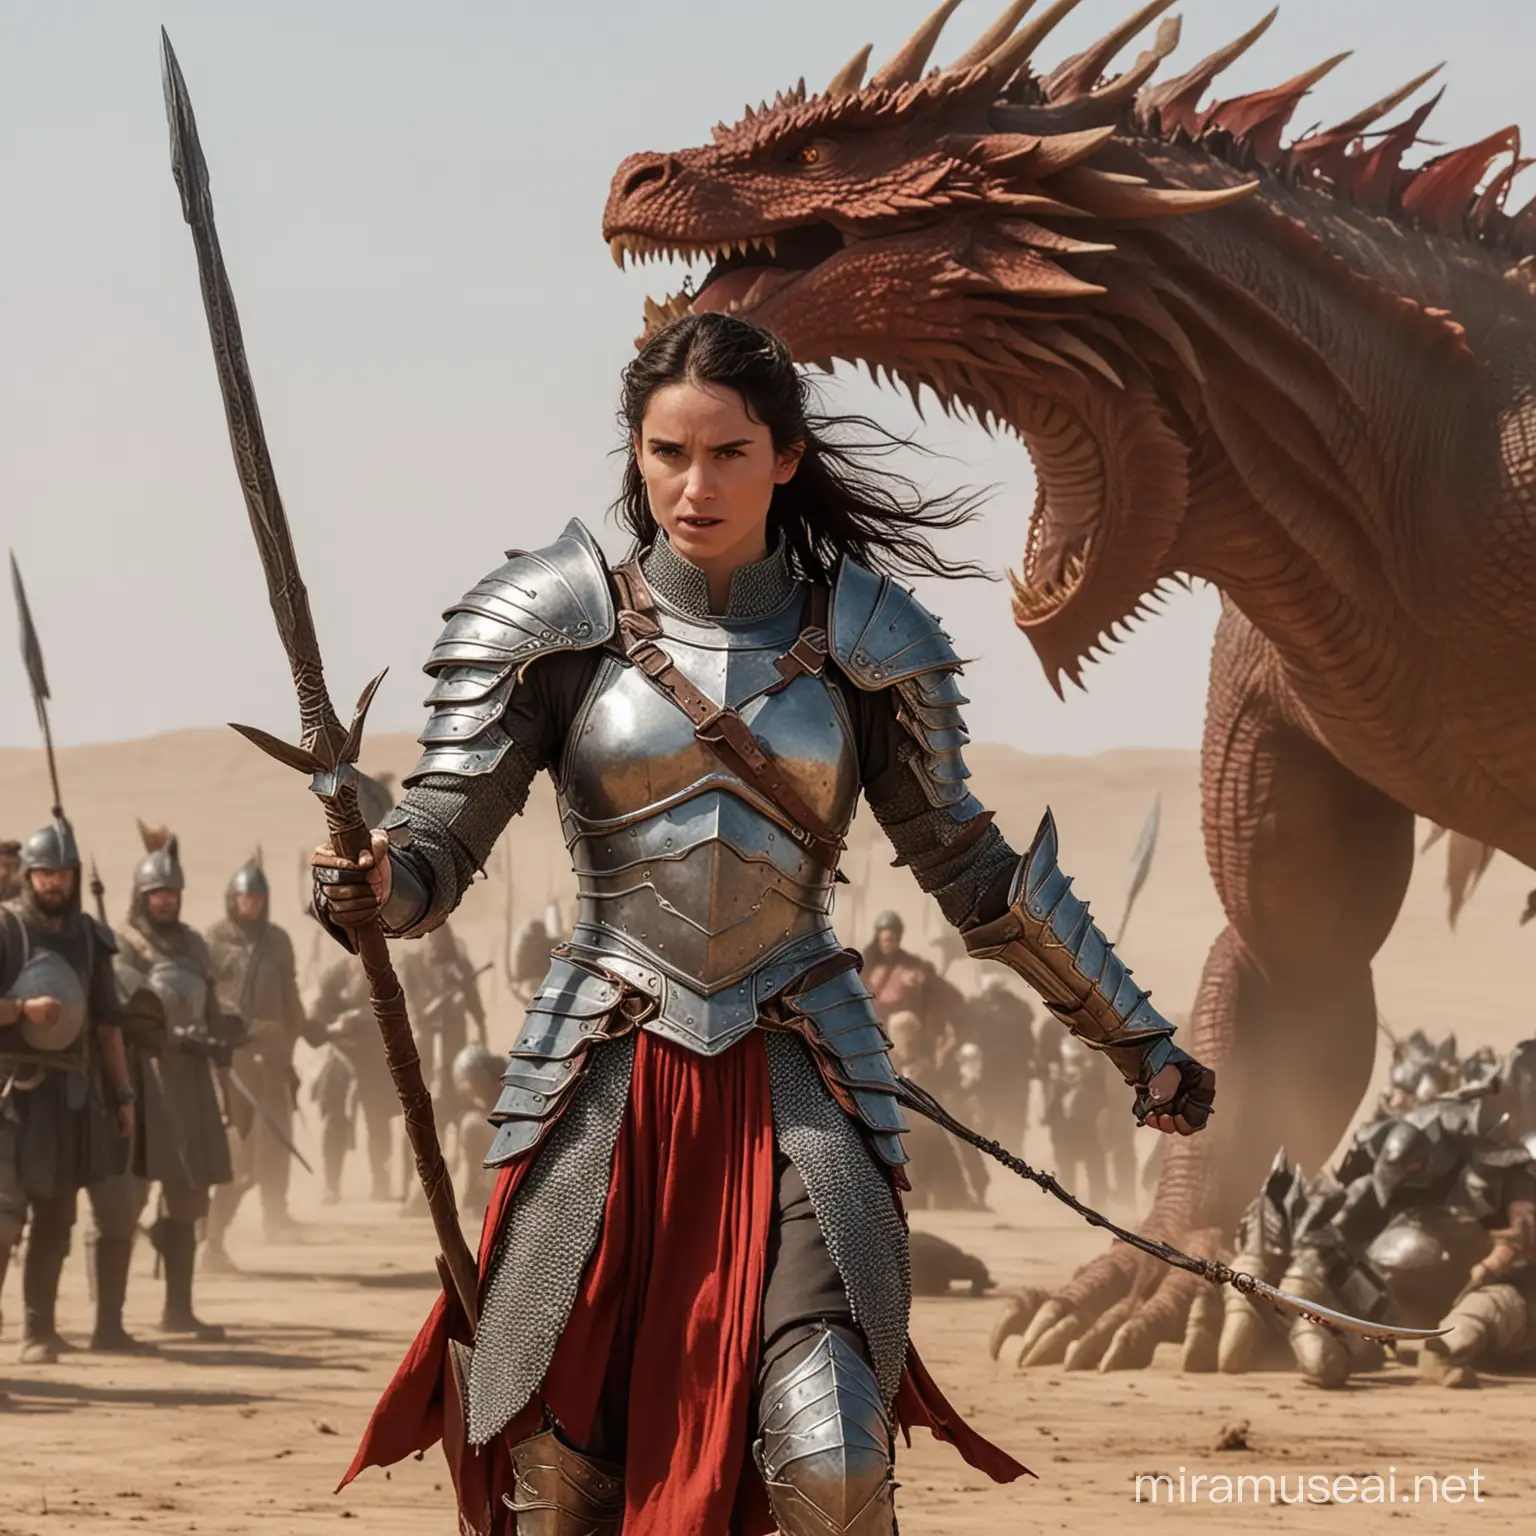 Jennifer Connely Warrior Battle Scene with Red Dragon and Urukhai